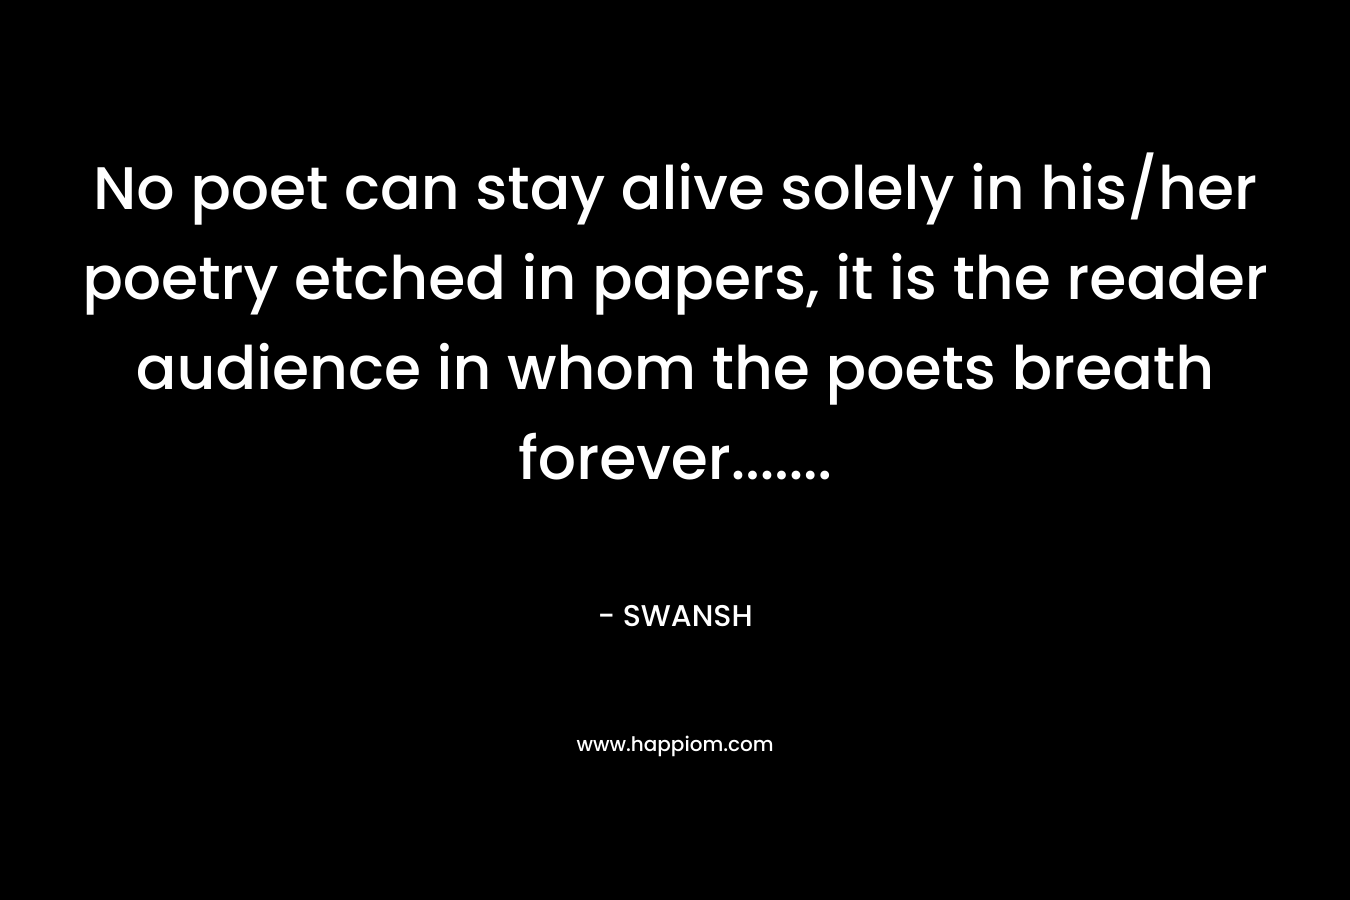 No poet can stay alive solely in his/her poetry etched in papers, it is the reader audience in whom the poets breath forever.......